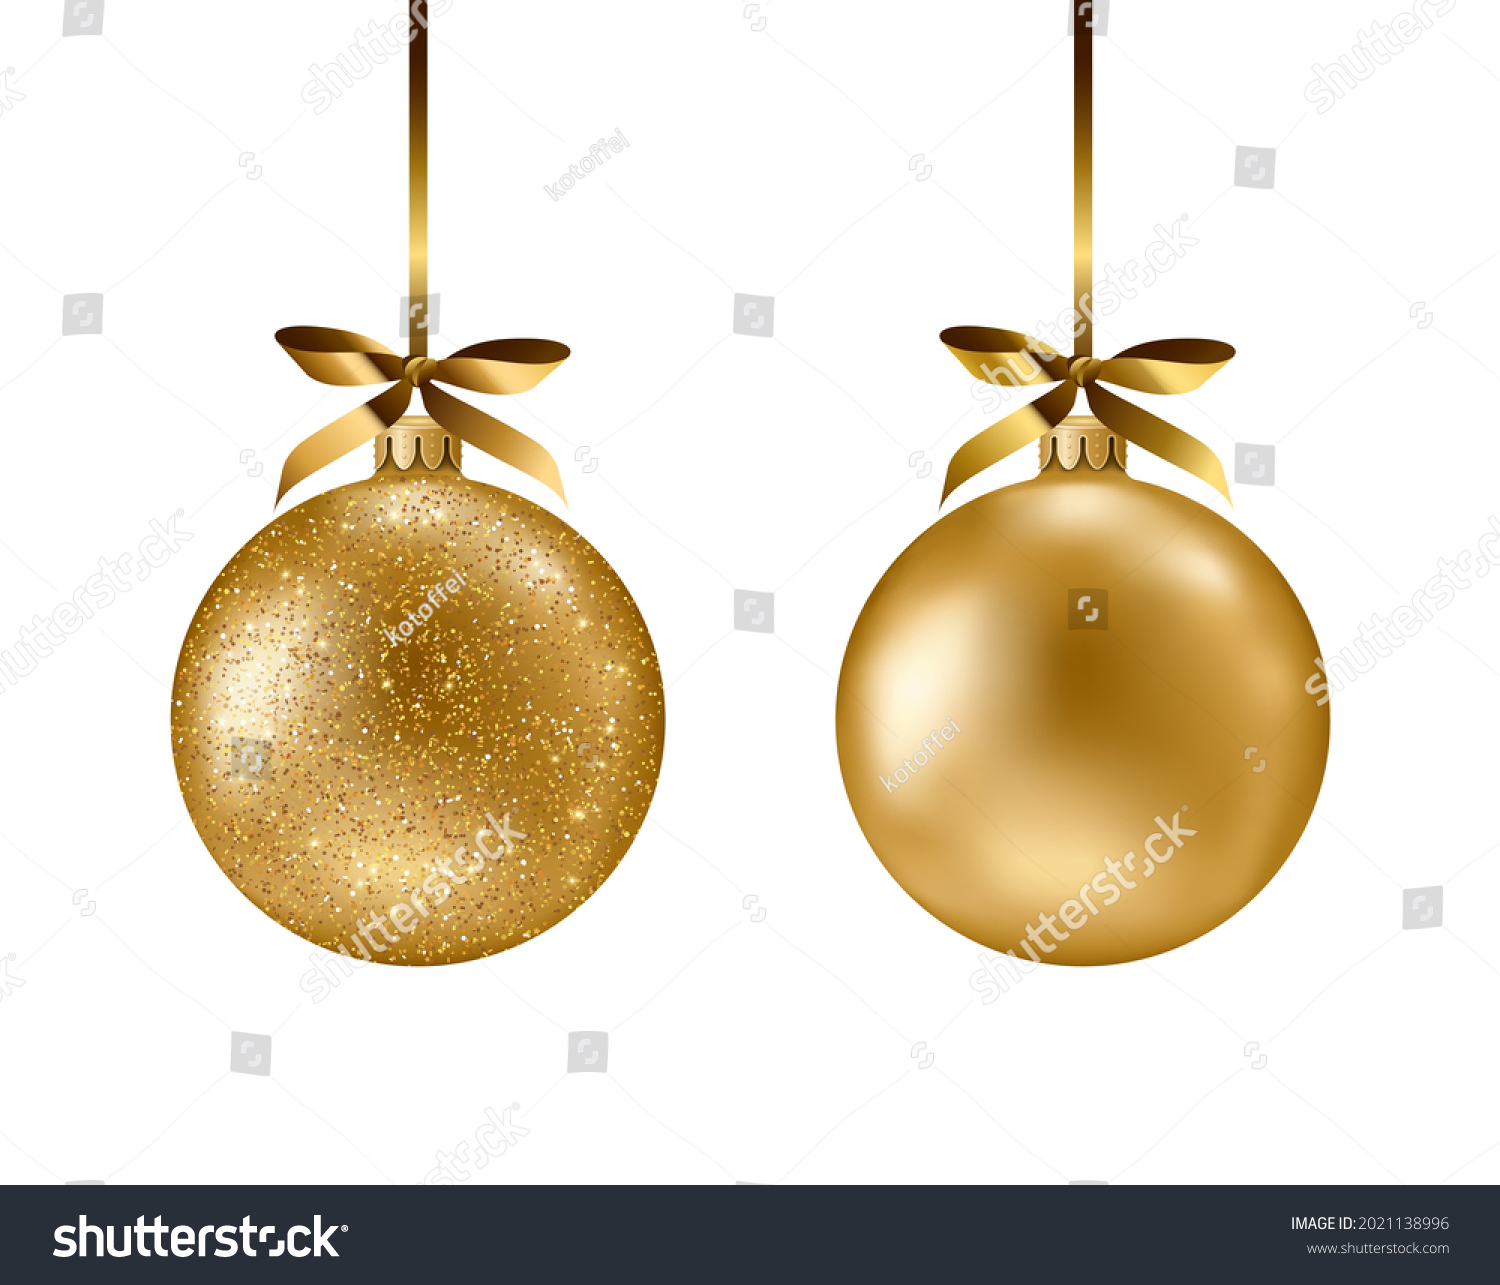 Golden ball set isolated on white background. Vector illustration. Merry Christmas and Happy New Year 2022 sphere decoration hanging with gold ribbon bow. Holiday Xmas toy bauble for fir tree #2021138996